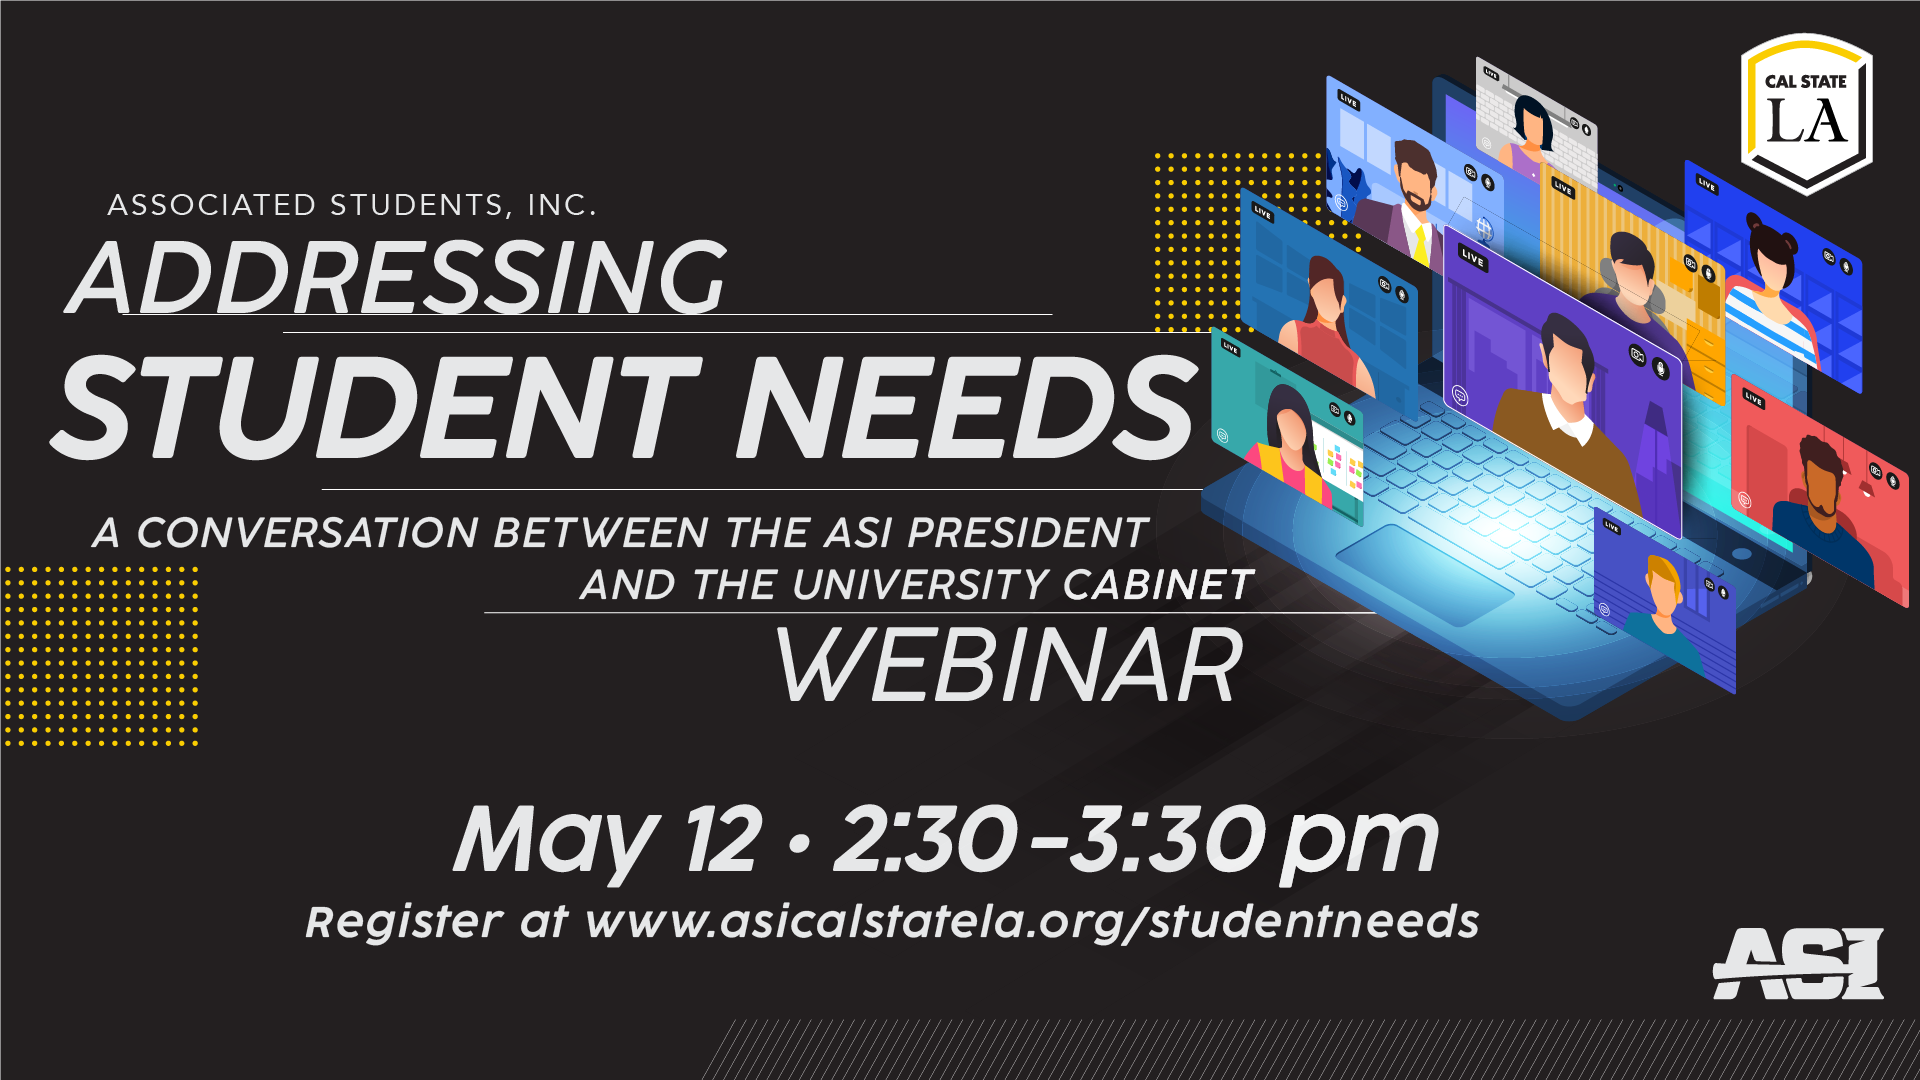 Addressing Student Needs:  A Conversation Between the ASI President and the University Cabinet Webinar